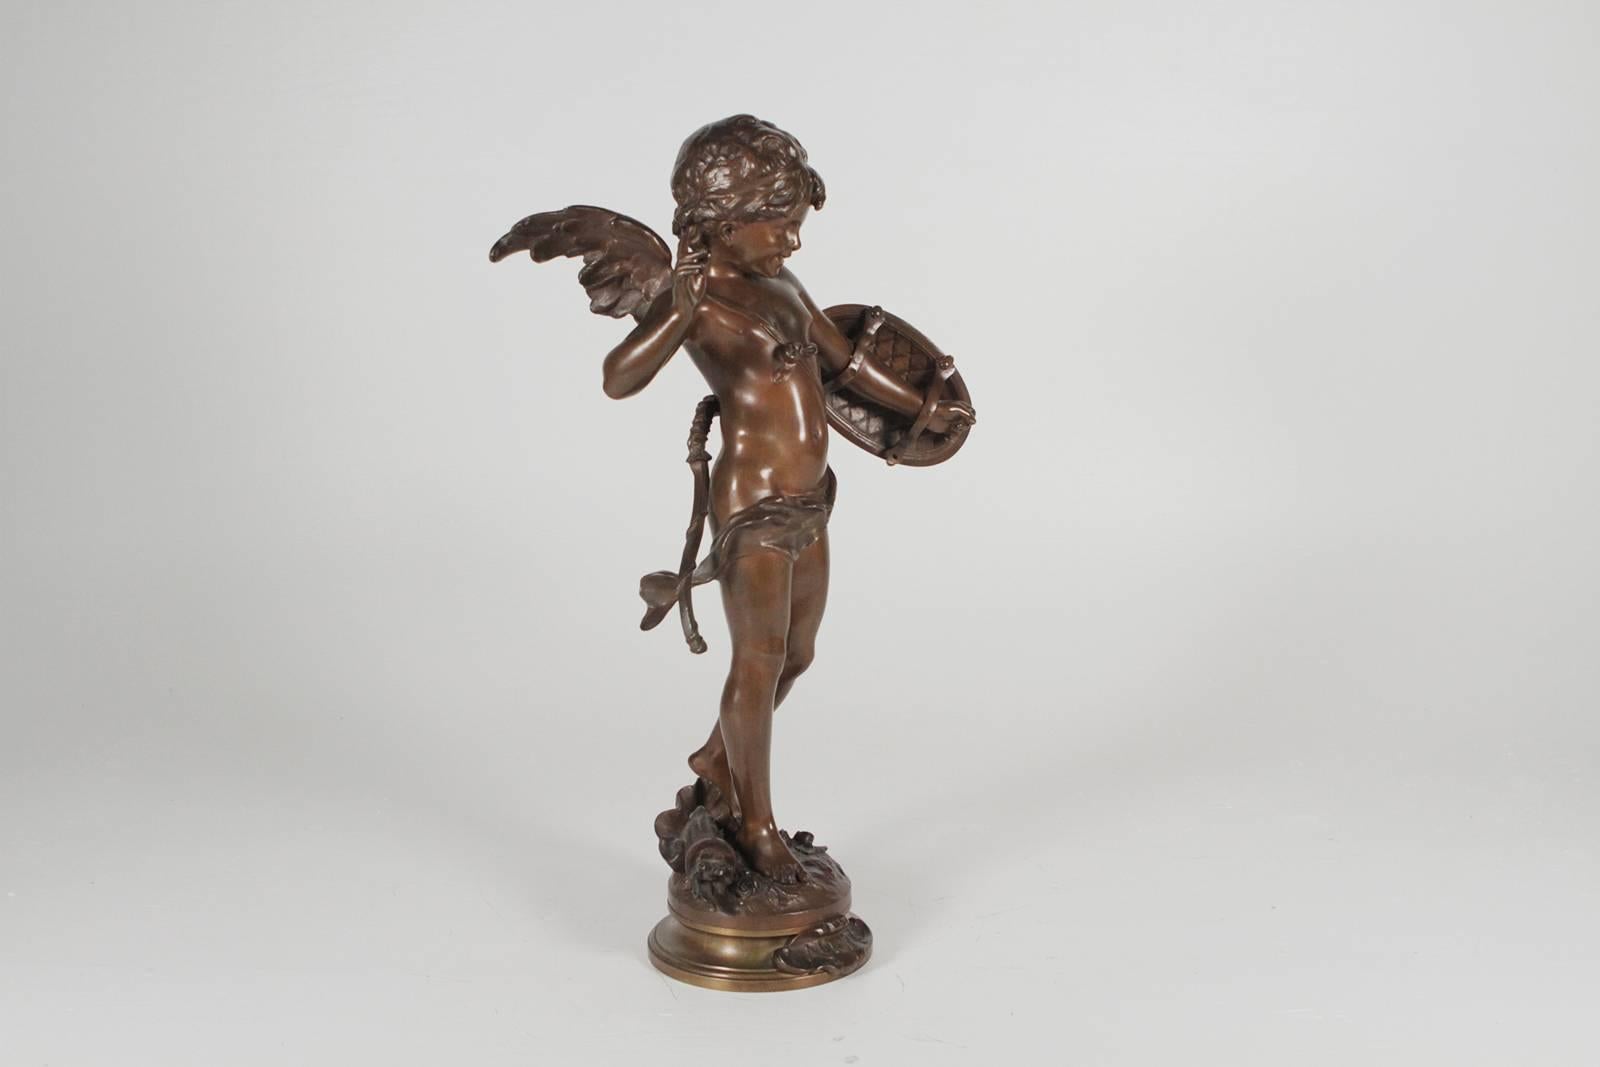 A bronze figure Alerte, Auguste Moreau (French, 1834-1917) The standing figure of cupid modeled with a bow on his back, love-shield on his arm, and a quiver by his feet, mounted atop a raised double base, artist signed and with title plaque.